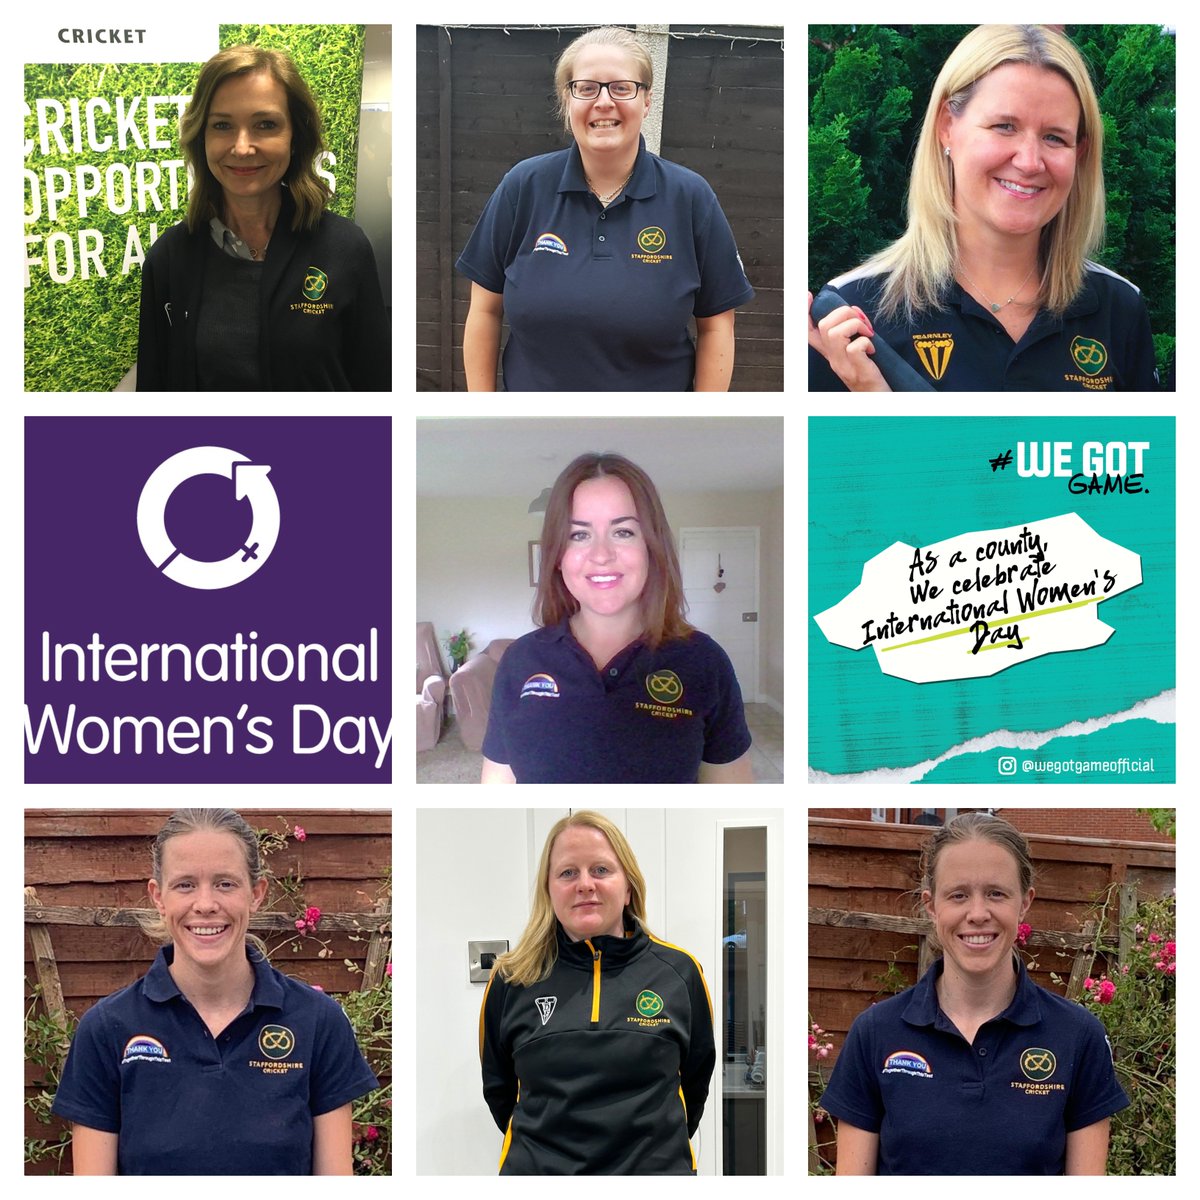 🏏On International Women's Day we celebrate the fantastic role models in our development team - professional staff, managers, players, administrators, coaches, umpires, scorers #seeitbeit #IWD2024 #InspireInclusion